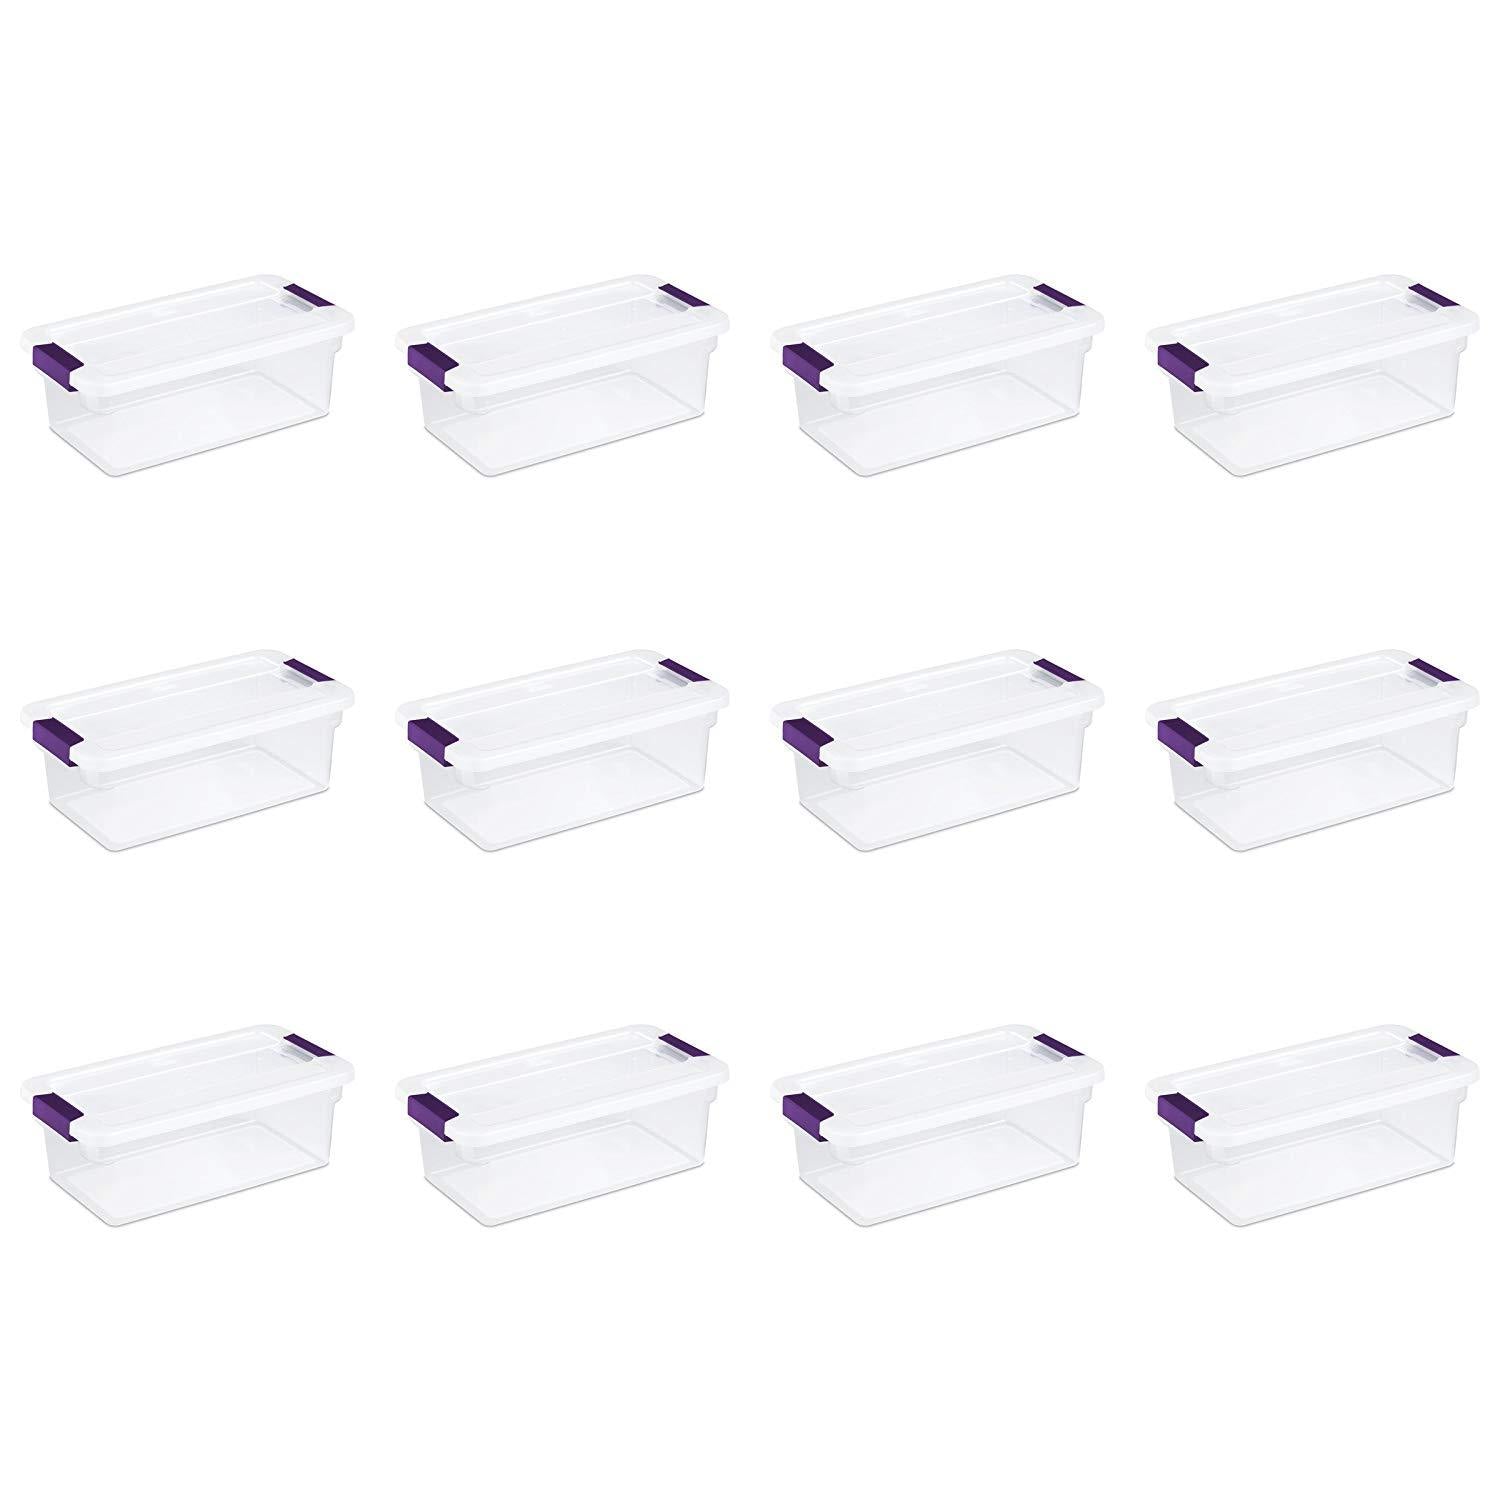 Sterilite Stacking Closet Storage Tote with Lid, White/Clear, 6 qt - 12 pack